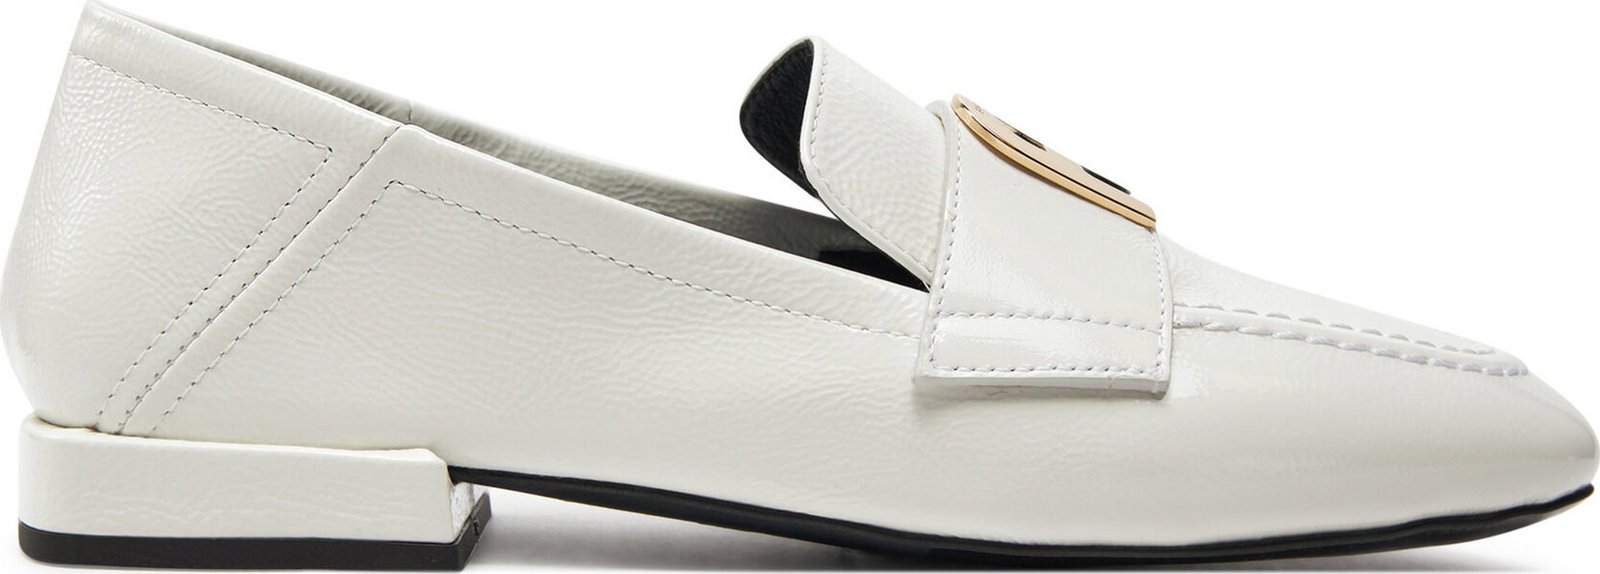 Lordsy Furla 1927 Convertible Loafer YE47ACO-W36000-1704S-10073700 Marshmallow